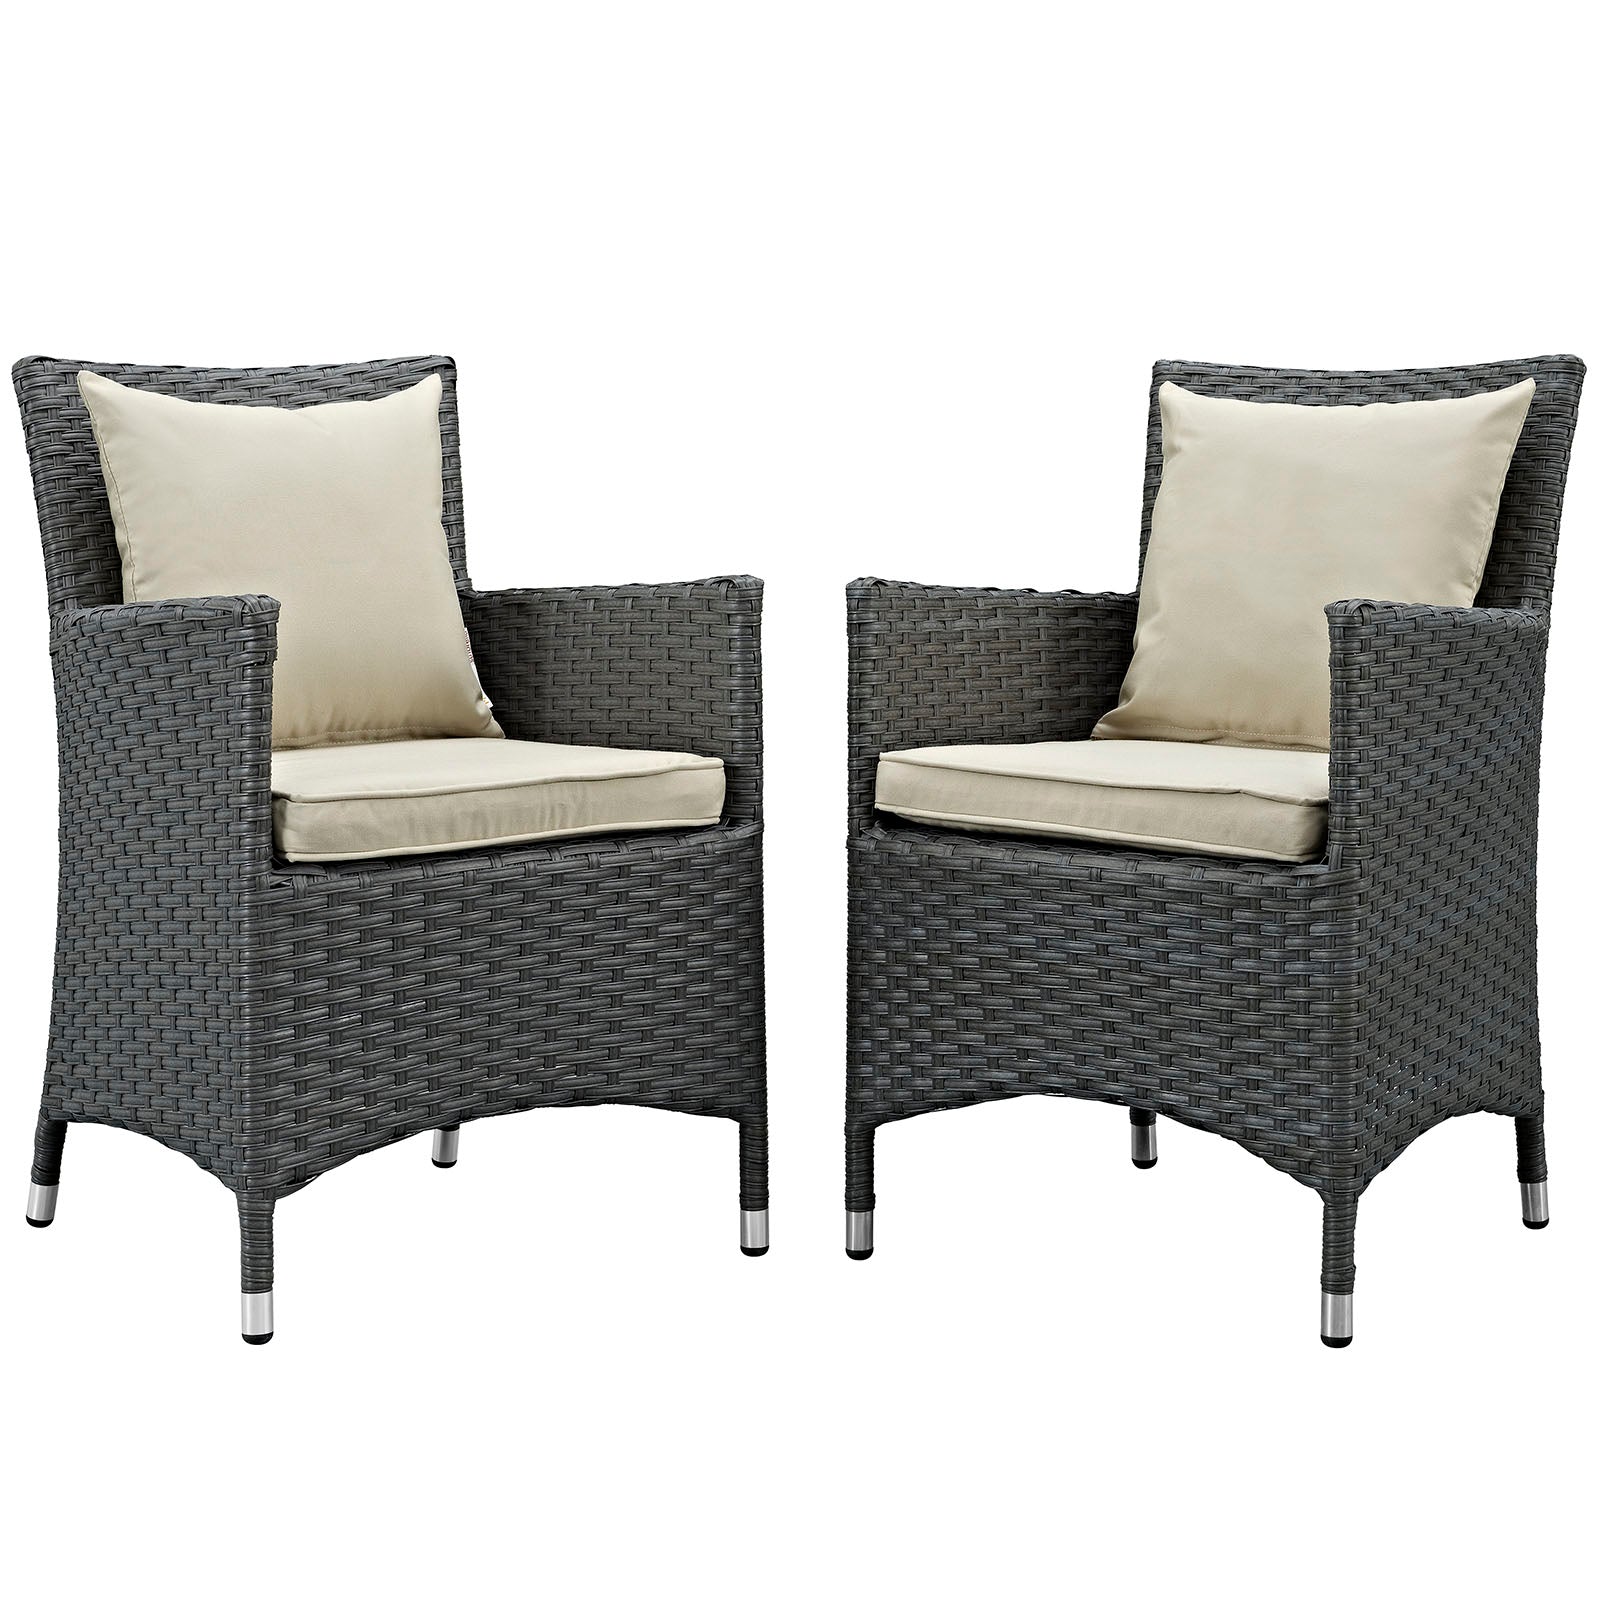 Sojourn 2 Piece Outdoor Patio Sunbrella® Dining Set - East Shore Modern Home Furnishings